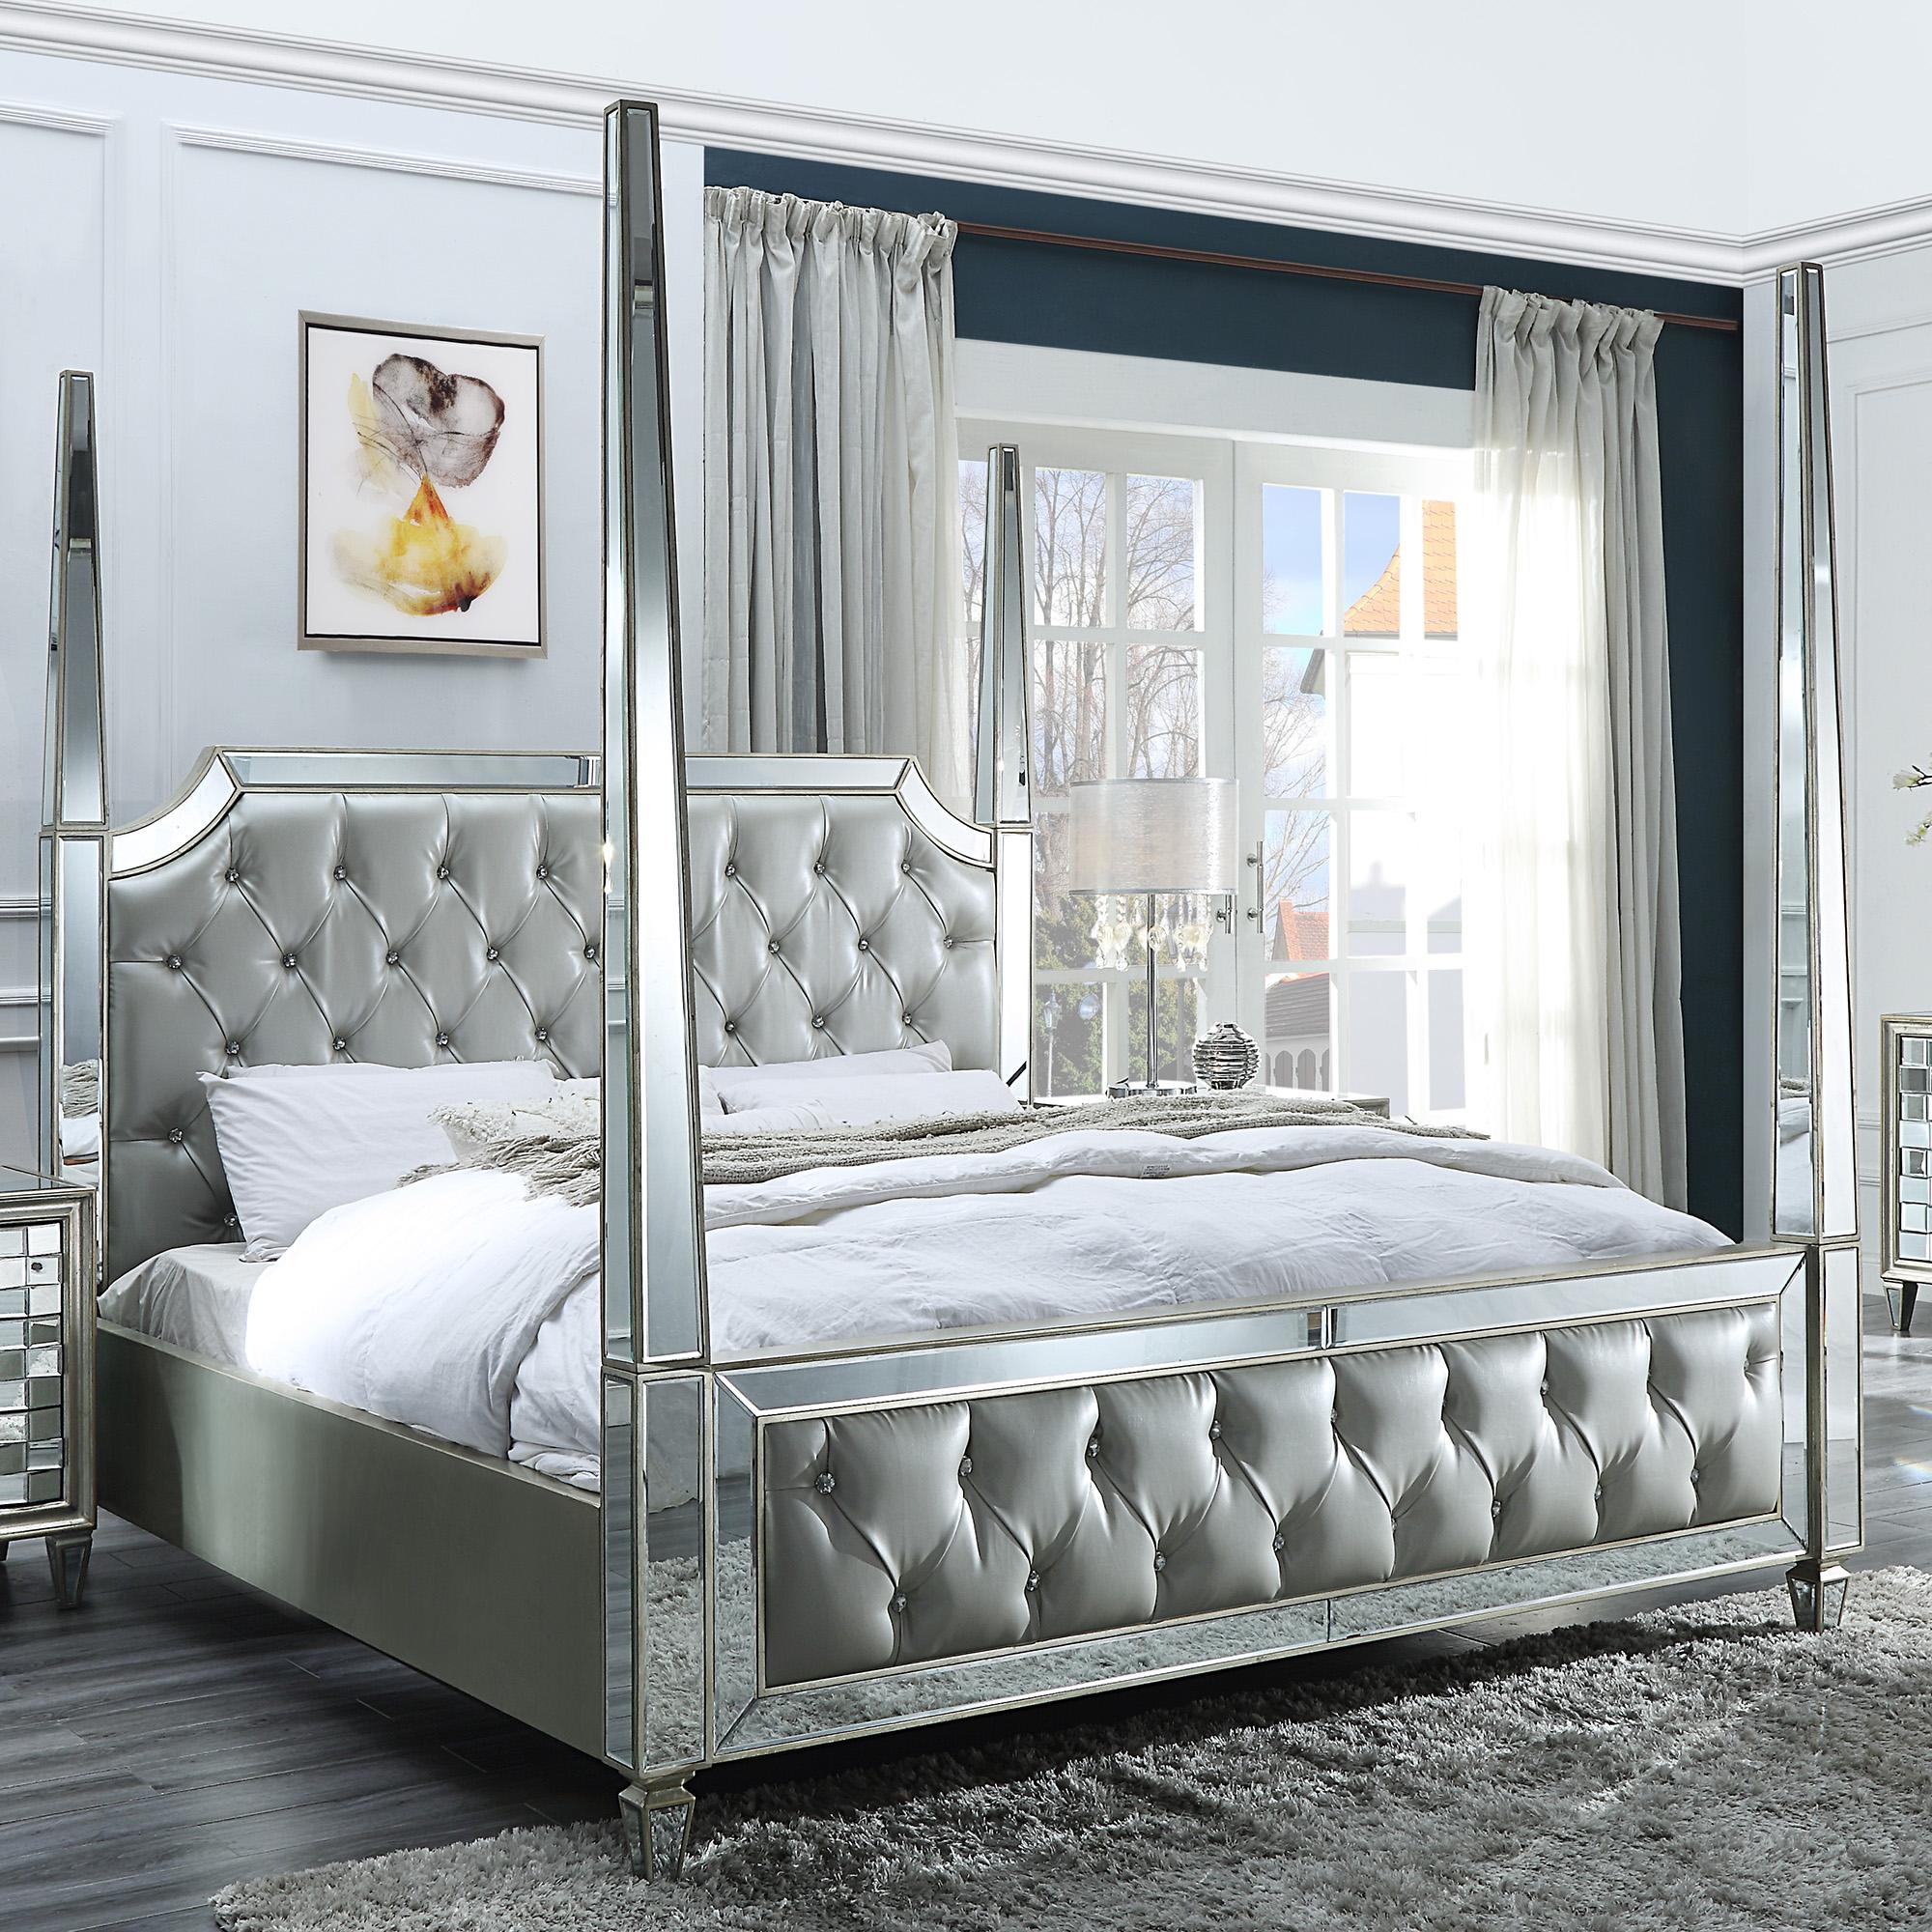 Modern Canopy Bed HD-6001 HD-CK6001 in Mirrored, Silver Faux Leather